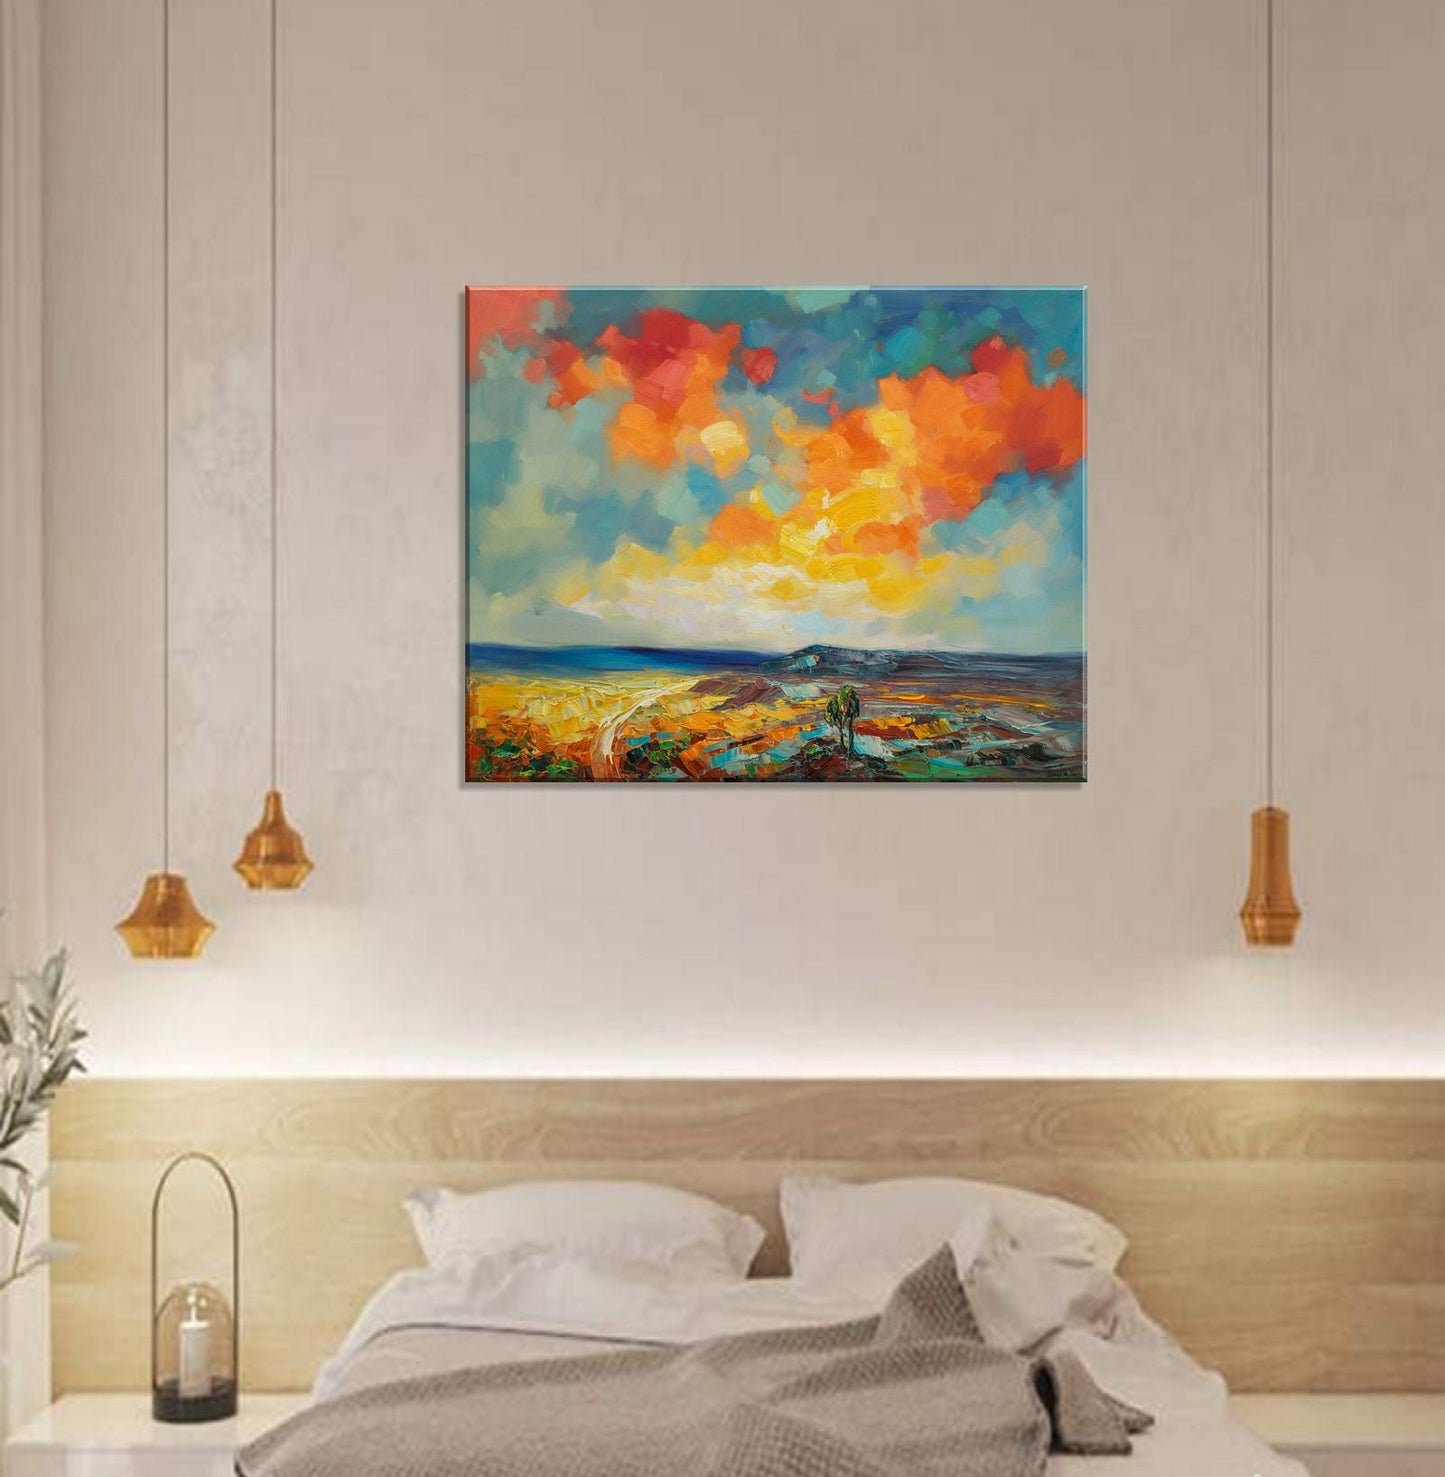 Large Art, Landscape Painting, Painting Abstract, Original Abstract Painting, Landscape Oil Painting, Wall Art, Large Canvas Art, Spring